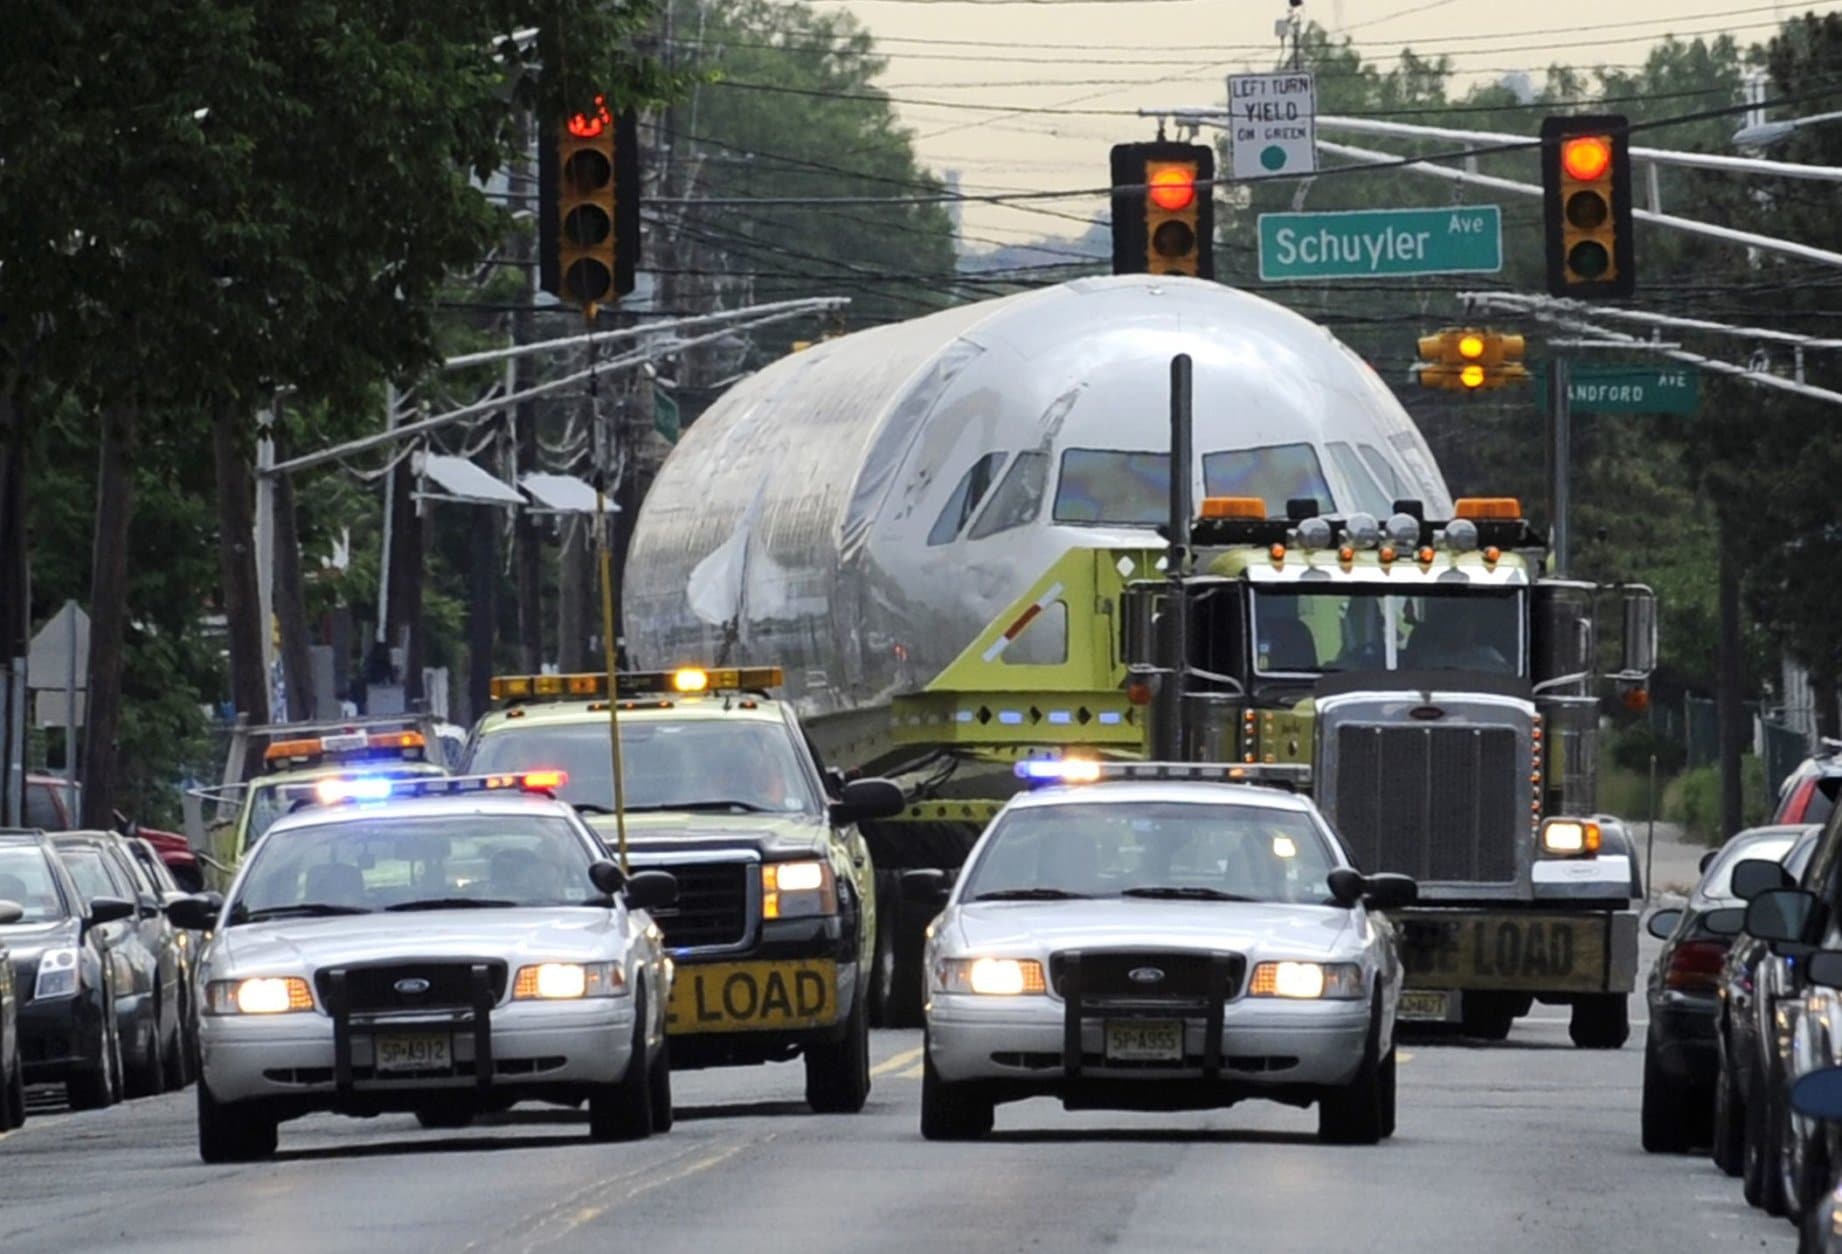 US Airways jet, flight 1549, is trucked onto local streets after leaving J. Supor and Sons warehouse in Harrison, N.J. Saturday, June 4, 2011. The plane that splash-landed in the Hudson River in 2009, making a national hero of pilot Chesley "Sully" Sullenberger, is being moved to an aviation museum in North Carolina, where it will be put on permanent display. (AP Photo/Bill Kostroun)